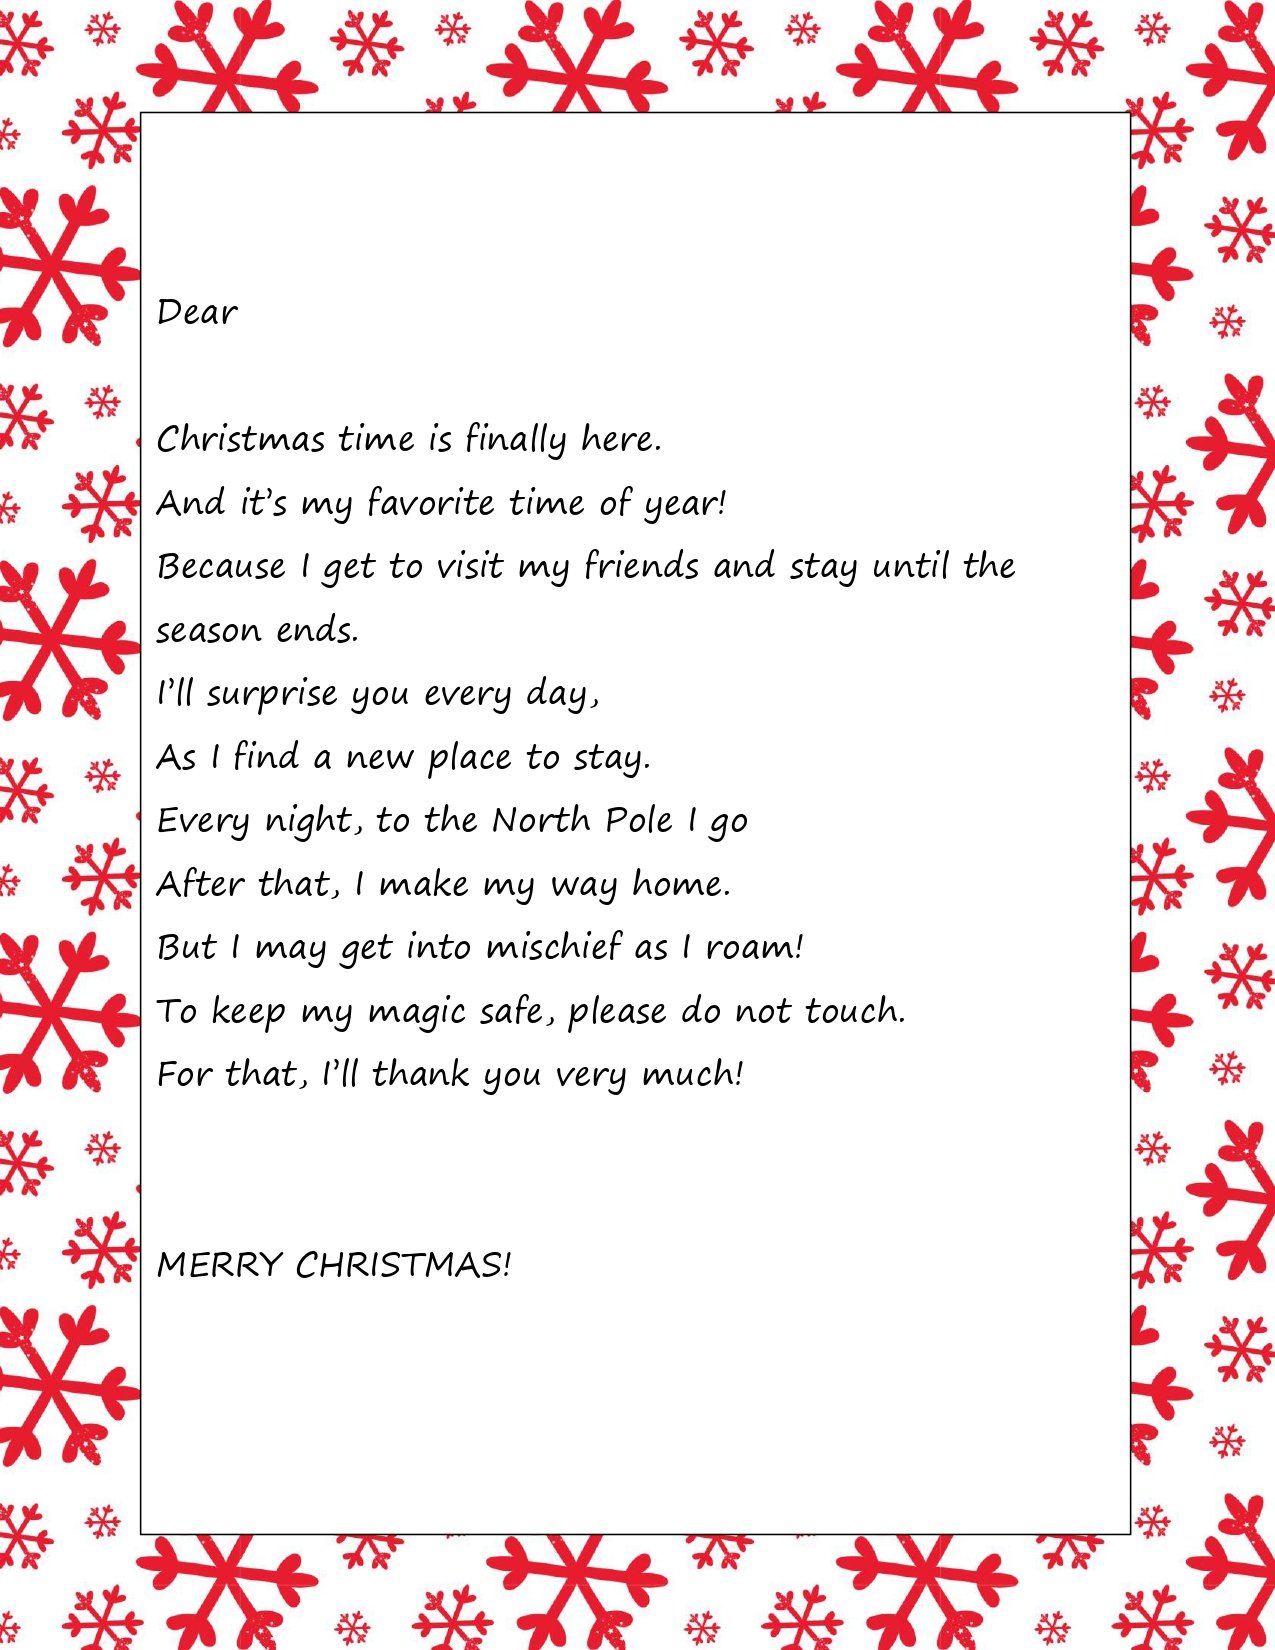 elf-on-the-shelf-arrival-letter-printable-template-free-sunny-home